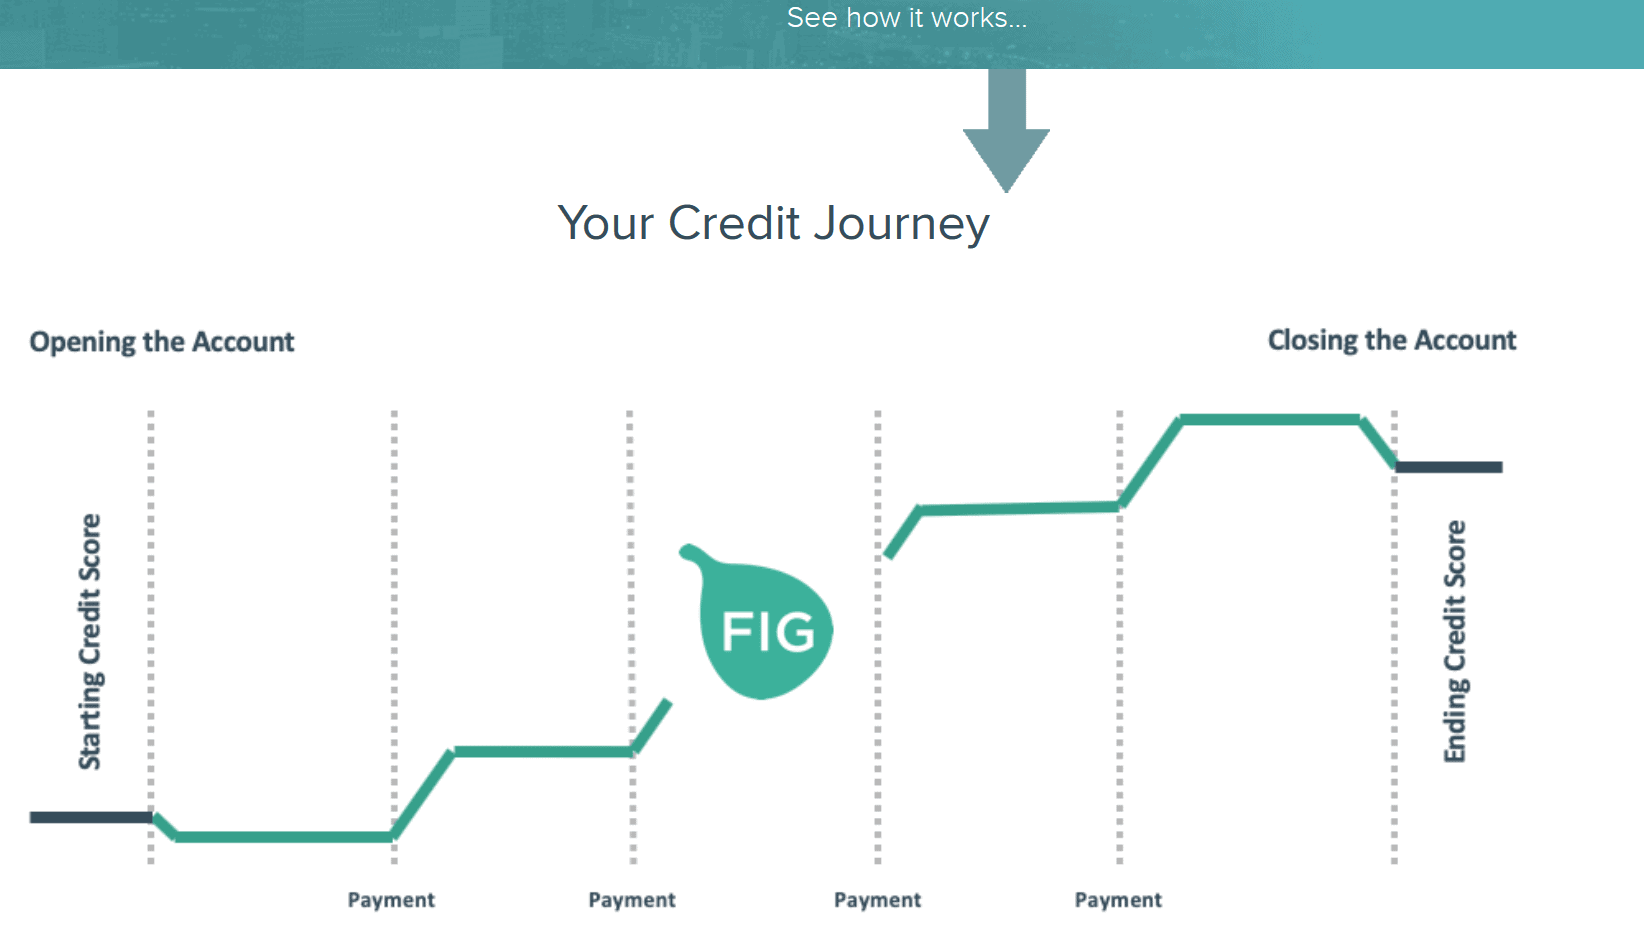 Fig Loans Review –...